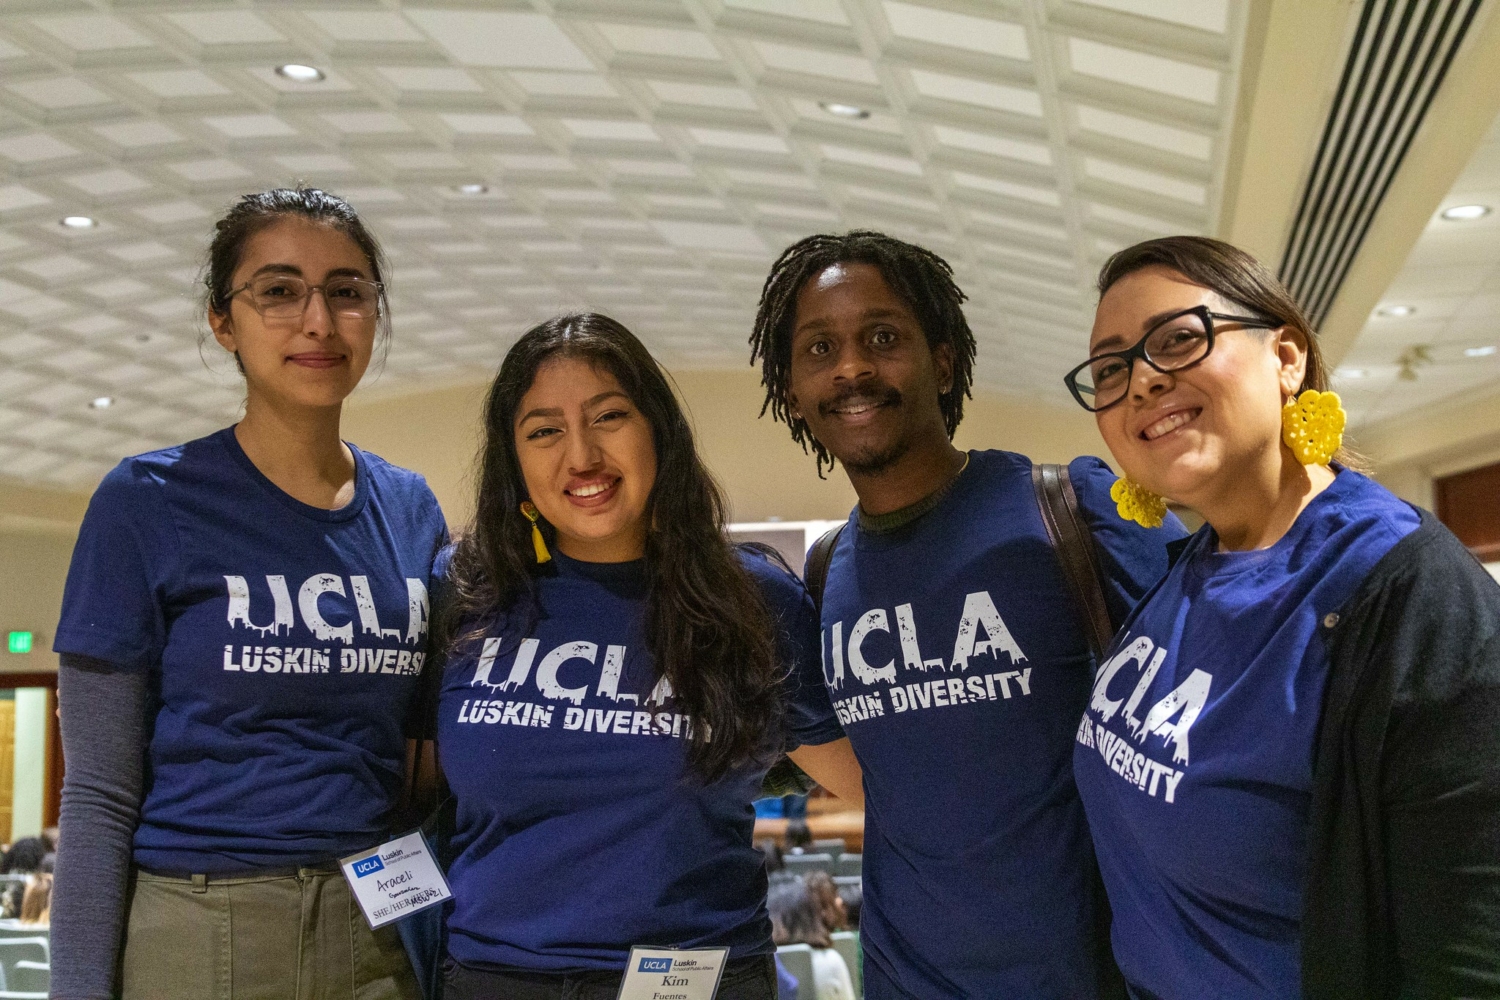 UCLA Luskin UCLA MSW Admissions and Recruitment Diversity Fair